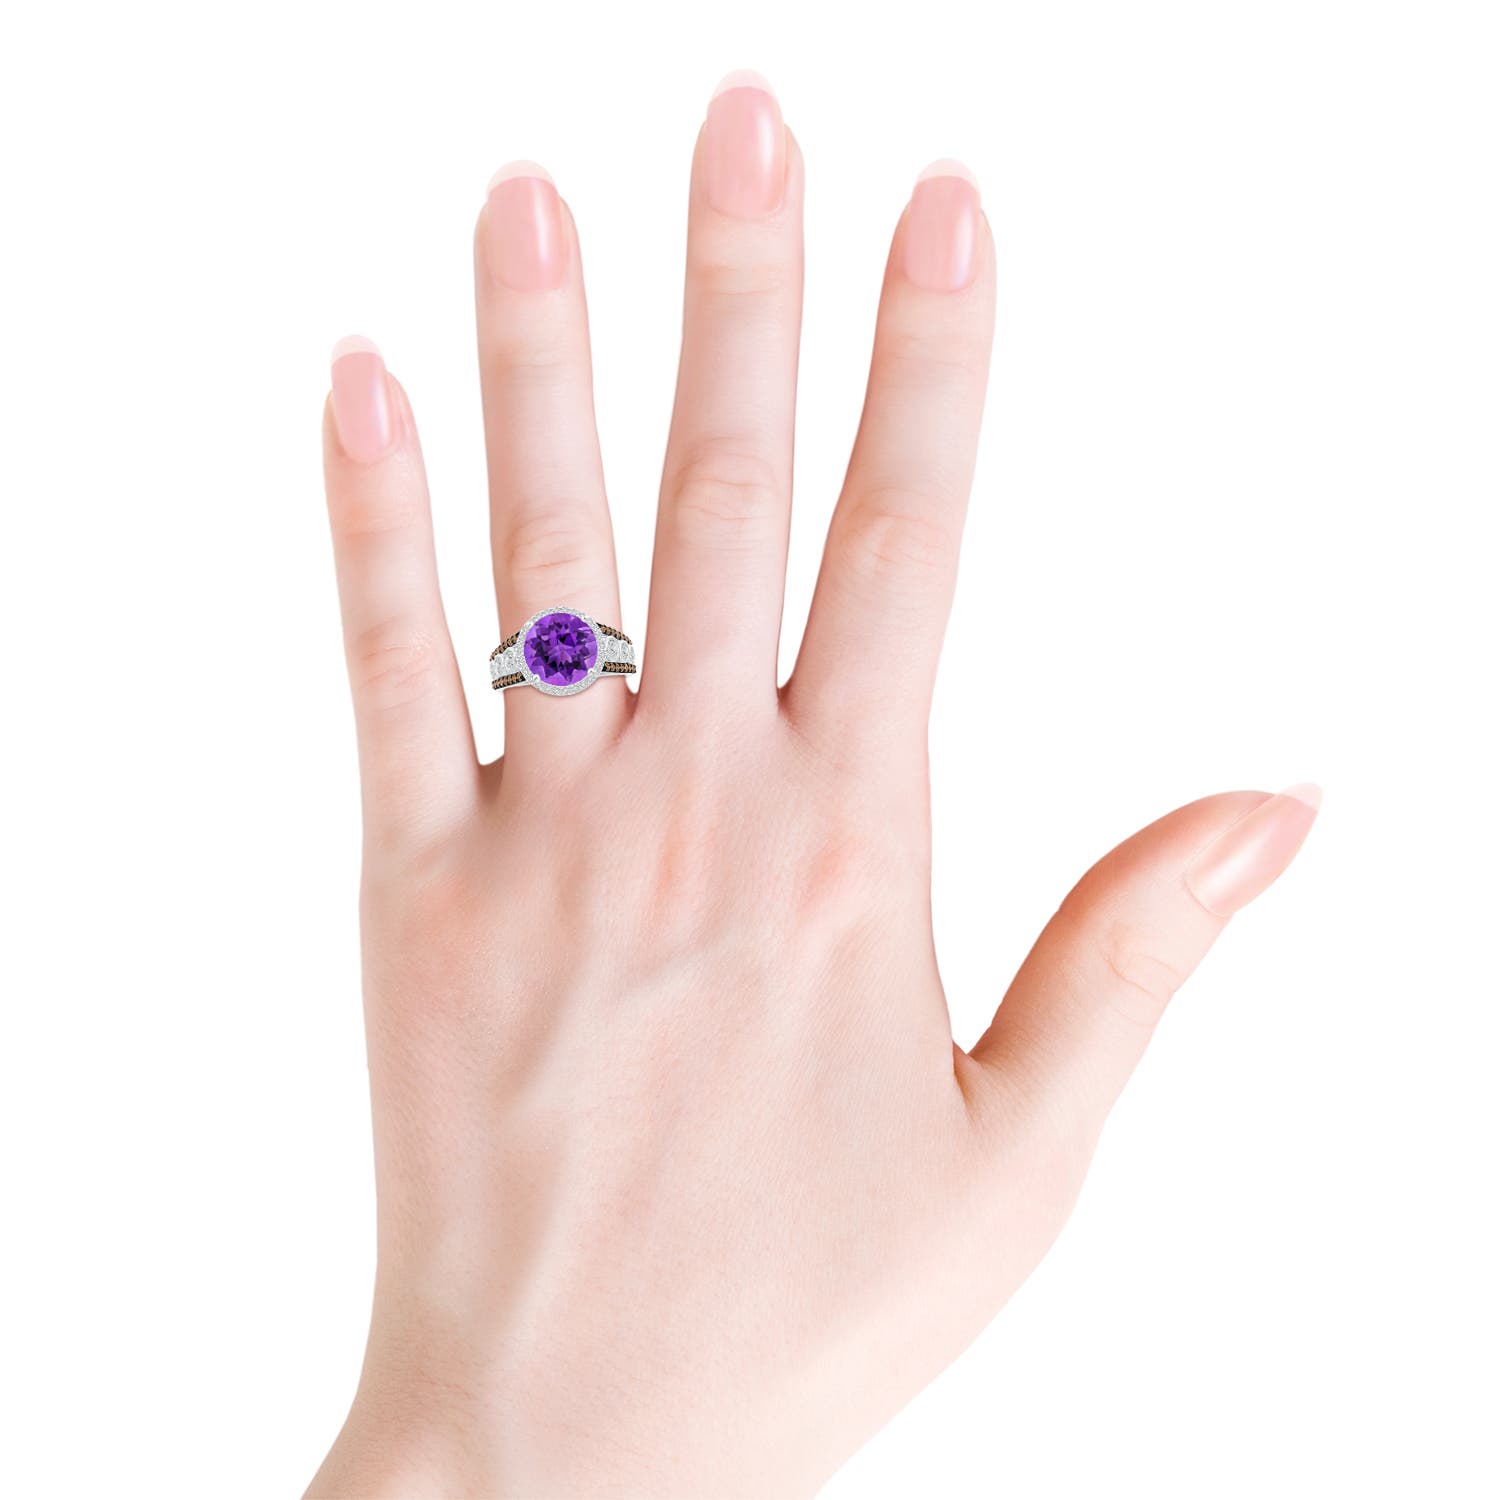 AAA - Amethyst / 4.42 CT / 14 KT White Gold